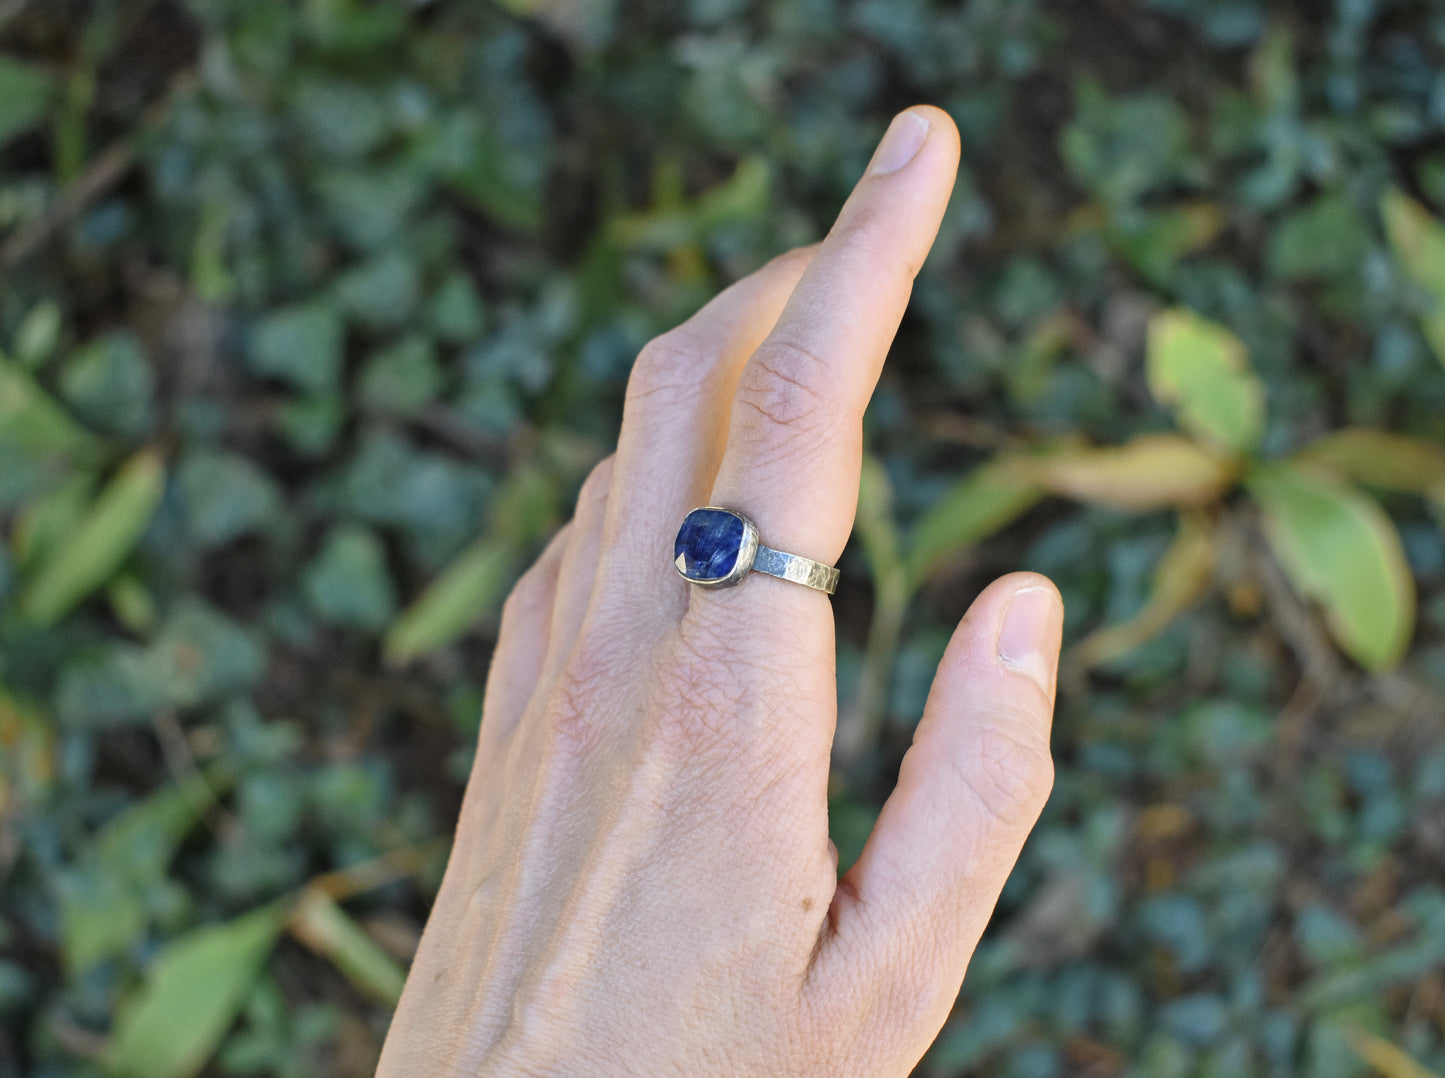 Blue Sapphire and Sterling Silver Ring, Size 7, Faceted Gemstone Metalsmith Jewelry